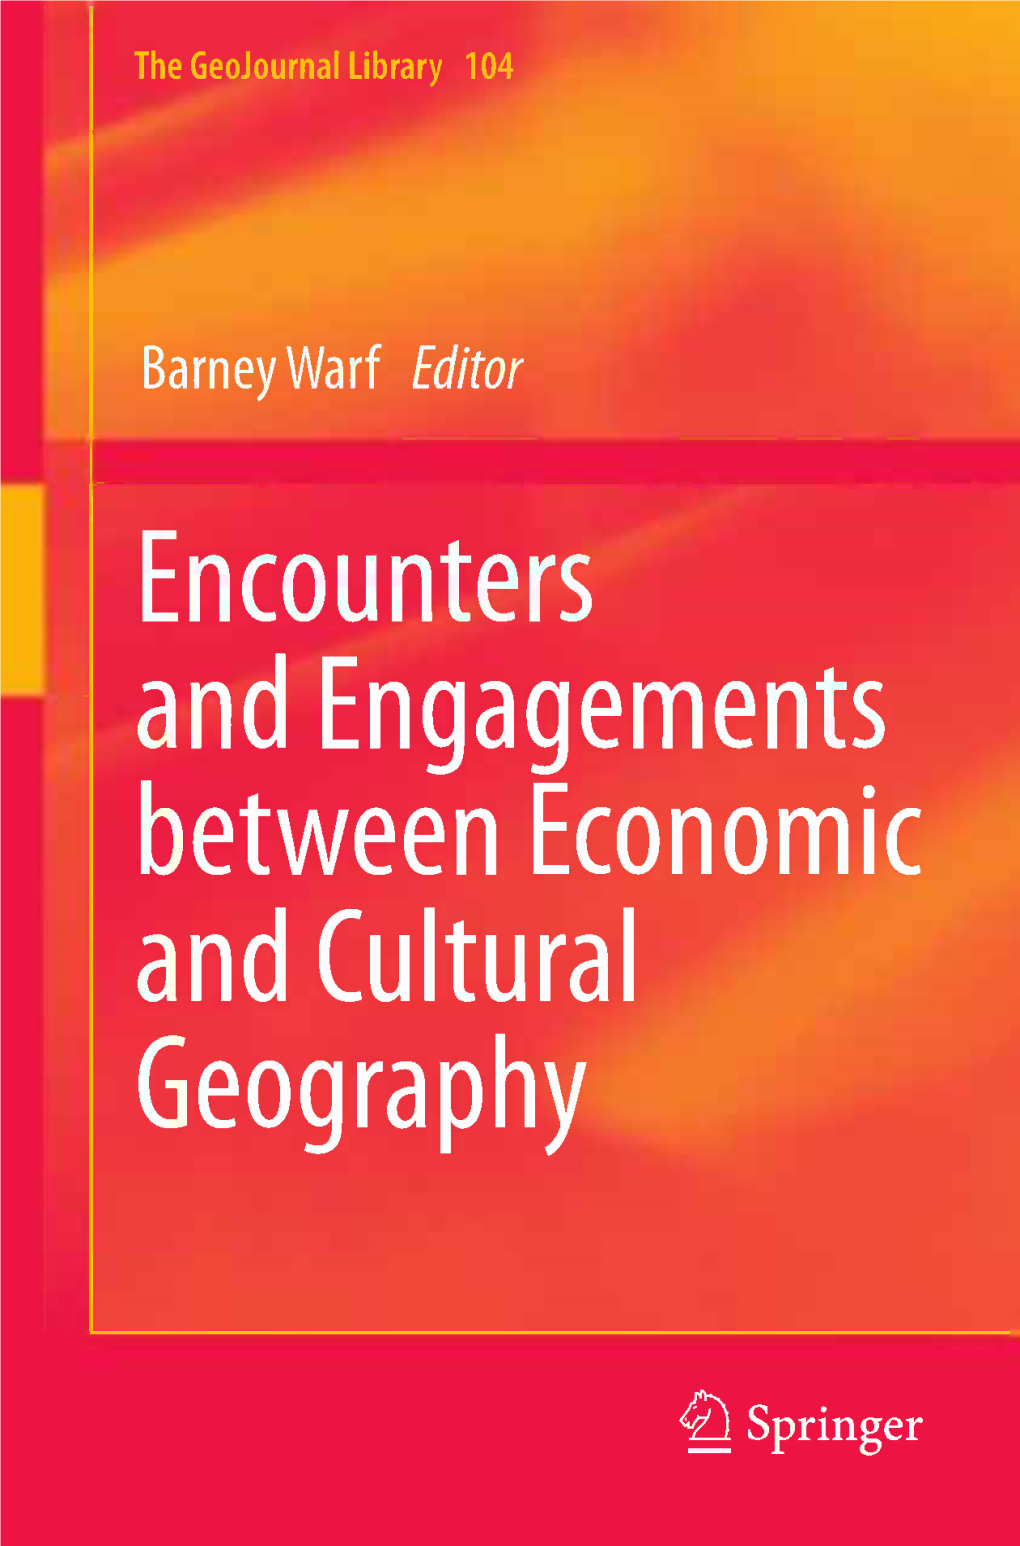 Encounters and Engagements Between Economic and Cultural Geography the Geojournal Library